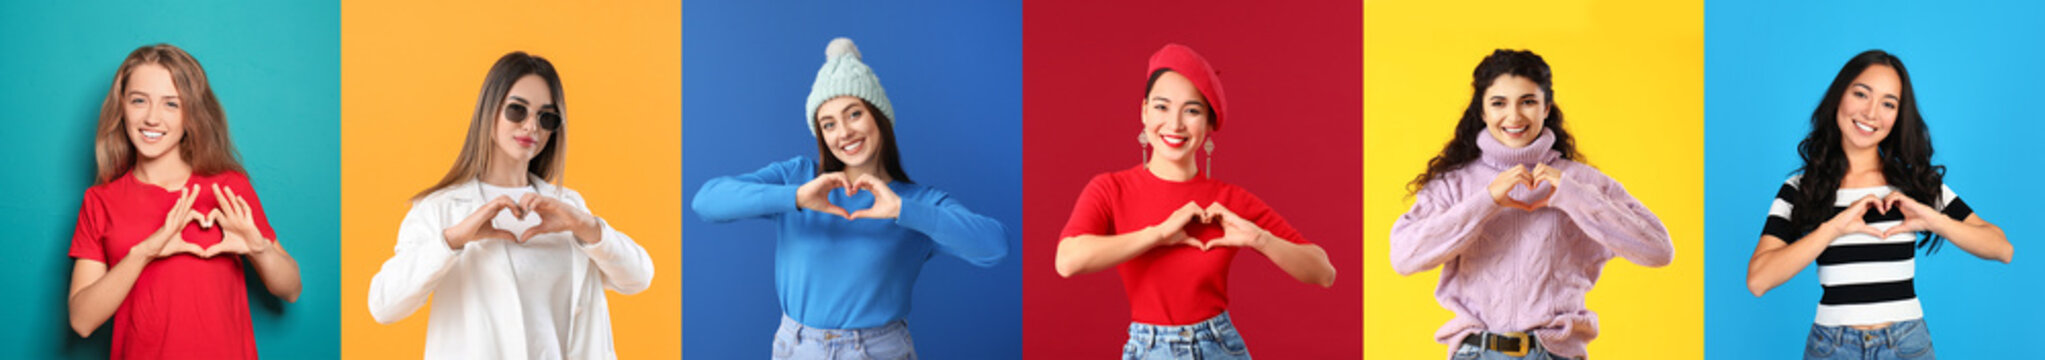 Collage of different young women making heart shape with their hands on color background